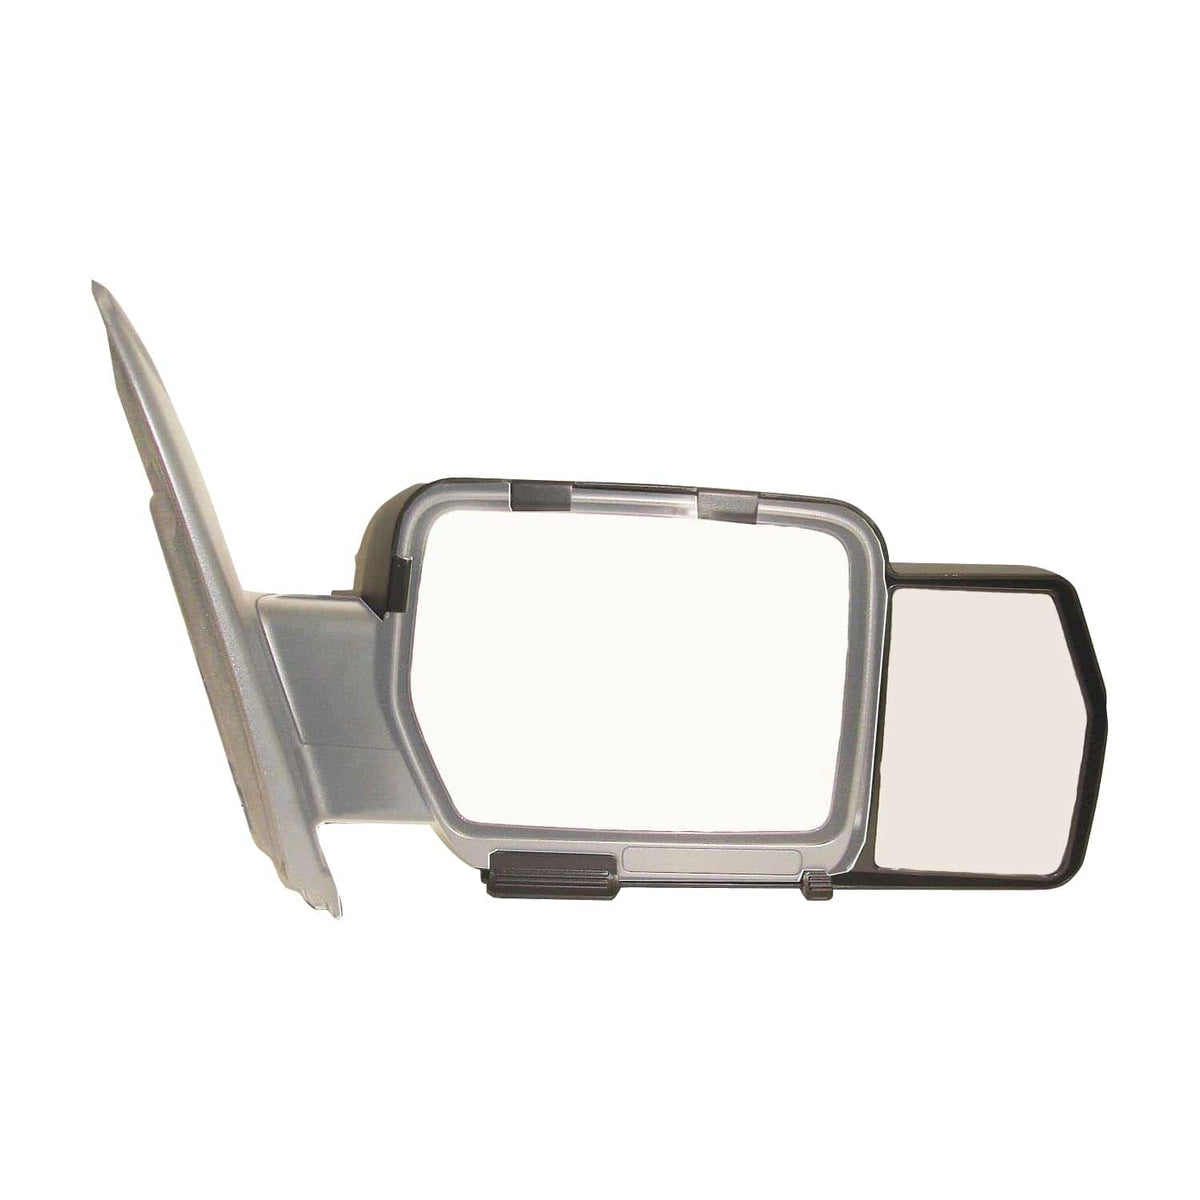 K-Source Qualifies for Free Shipping K-Source Snap-On Towing Mirrors fits Ford F150 09-14 #81810